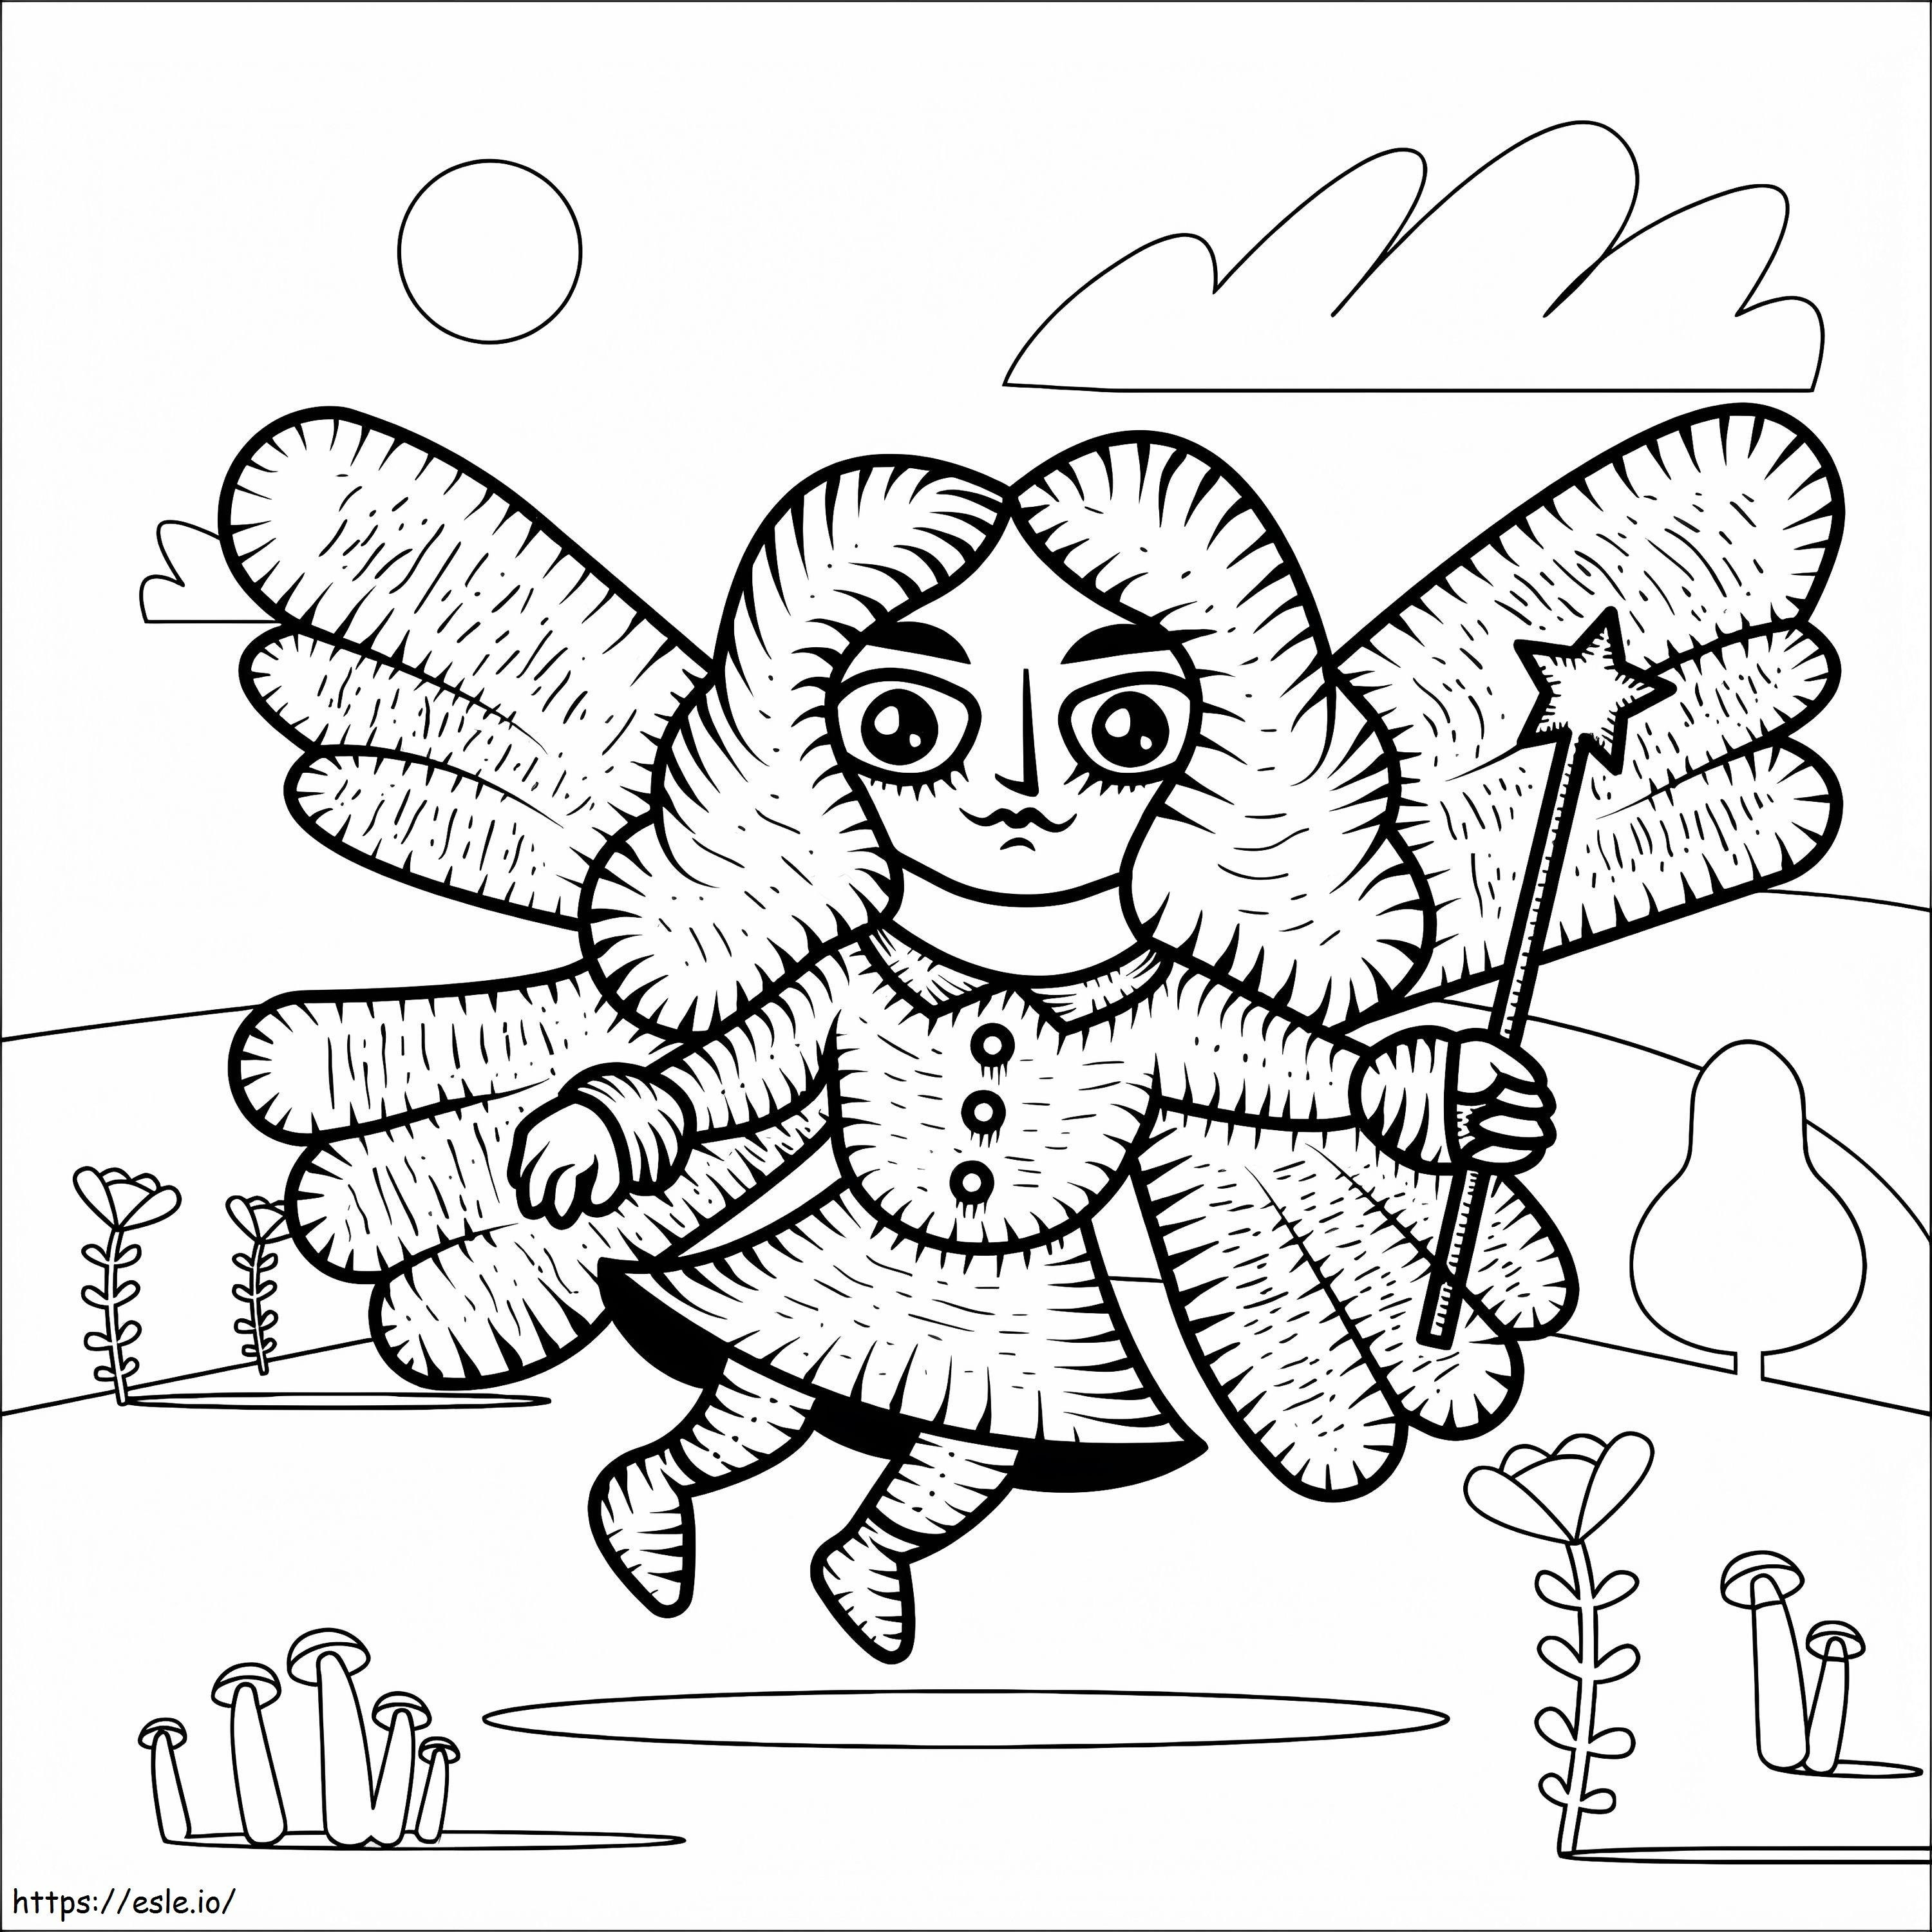 Fairy 1 coloring page